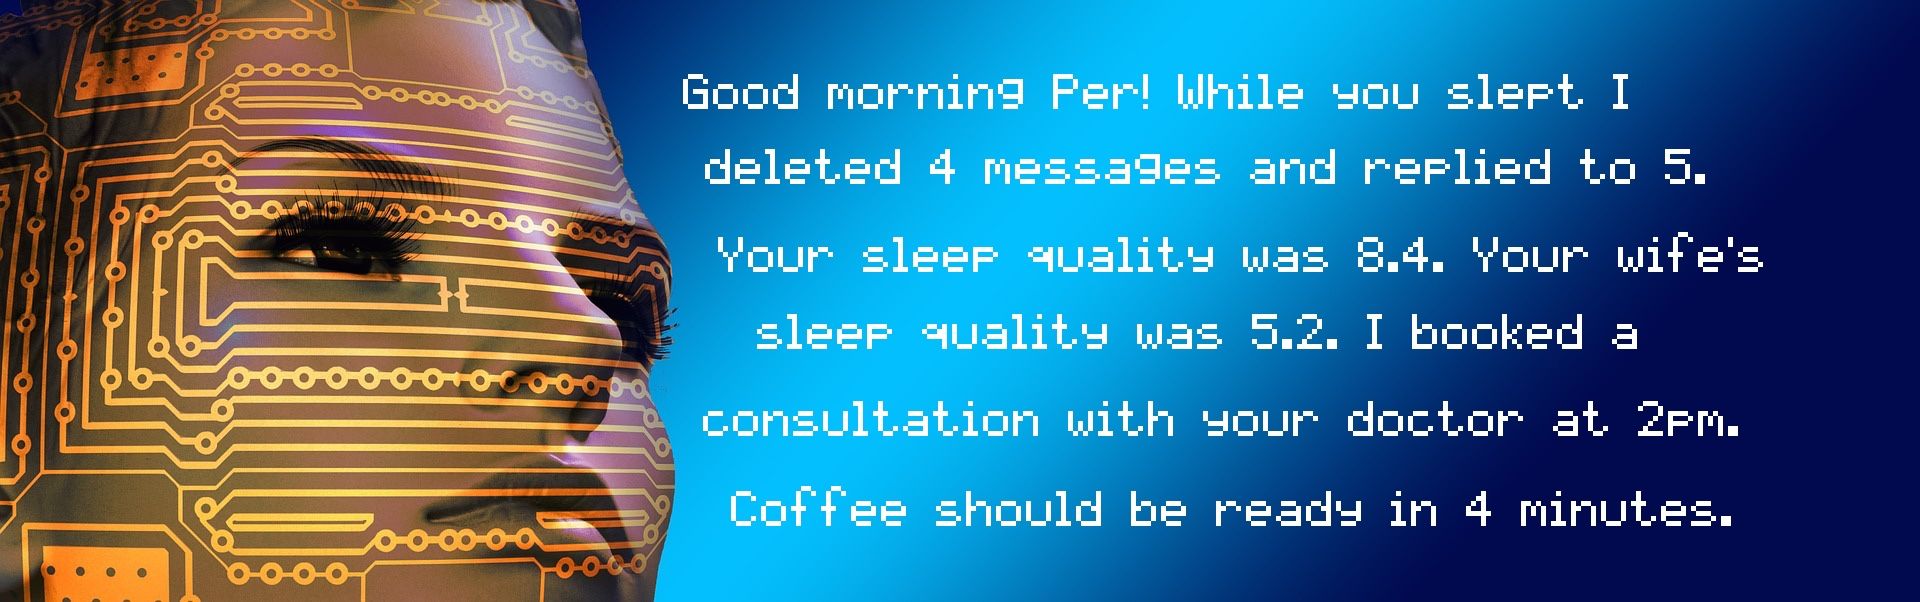 Computerized message: Good morning Per! While you slept I deleted 4 messages and replied to 5. Your sleep quality was 8.4. Your wife's sleep quality was 5.2. I booked a consultation with your doctor at 2pm. Coffee should be ready in 4 minutes.